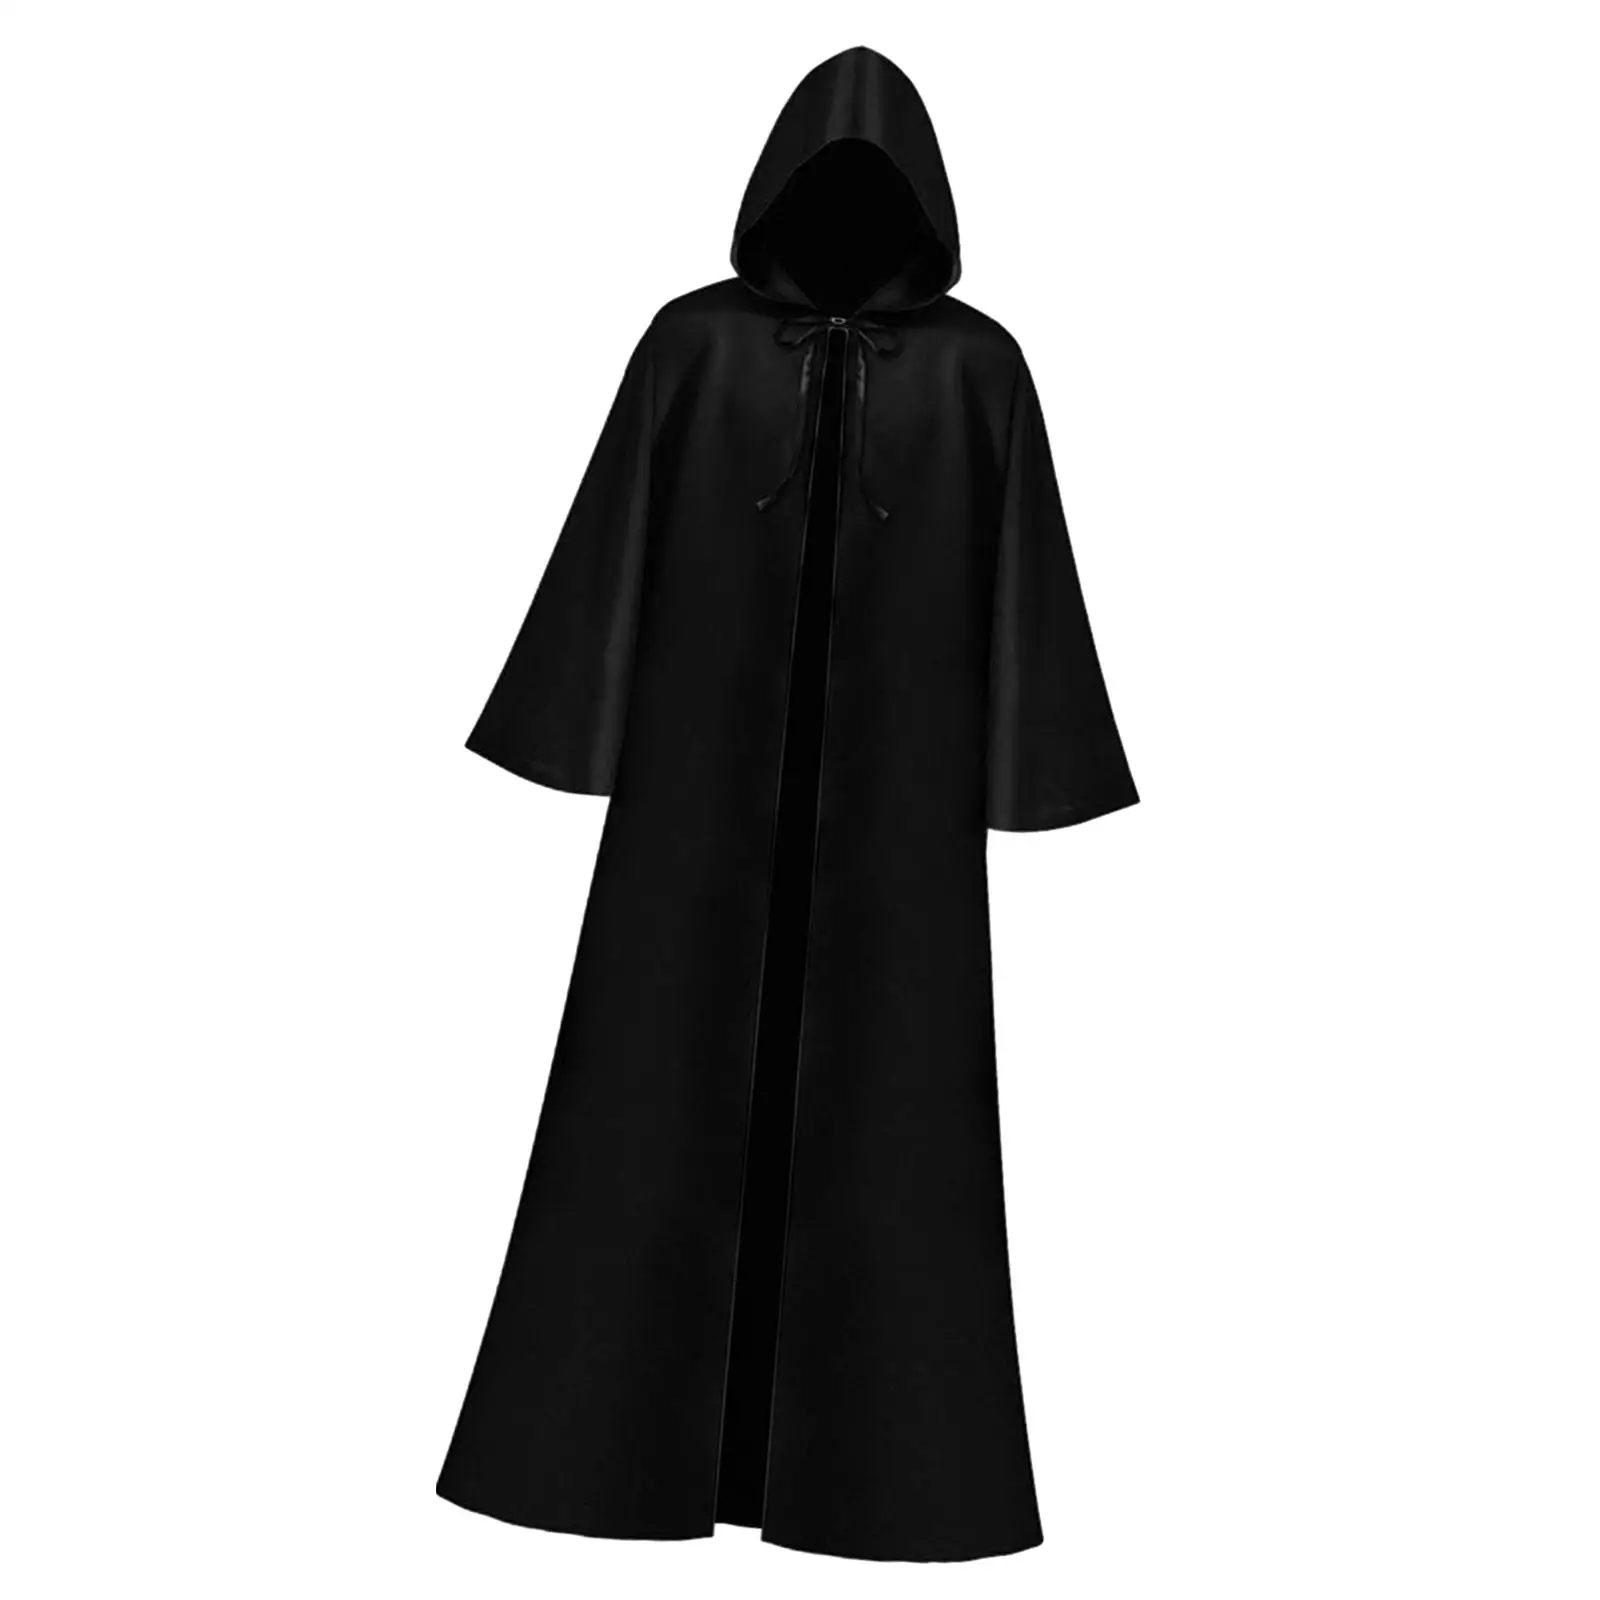 Halloween Hooded Cloak Dress up Medieval Devil Outfit Long Hooded Cloak for Club Easter Performance Fancy Dress Party Punk Party